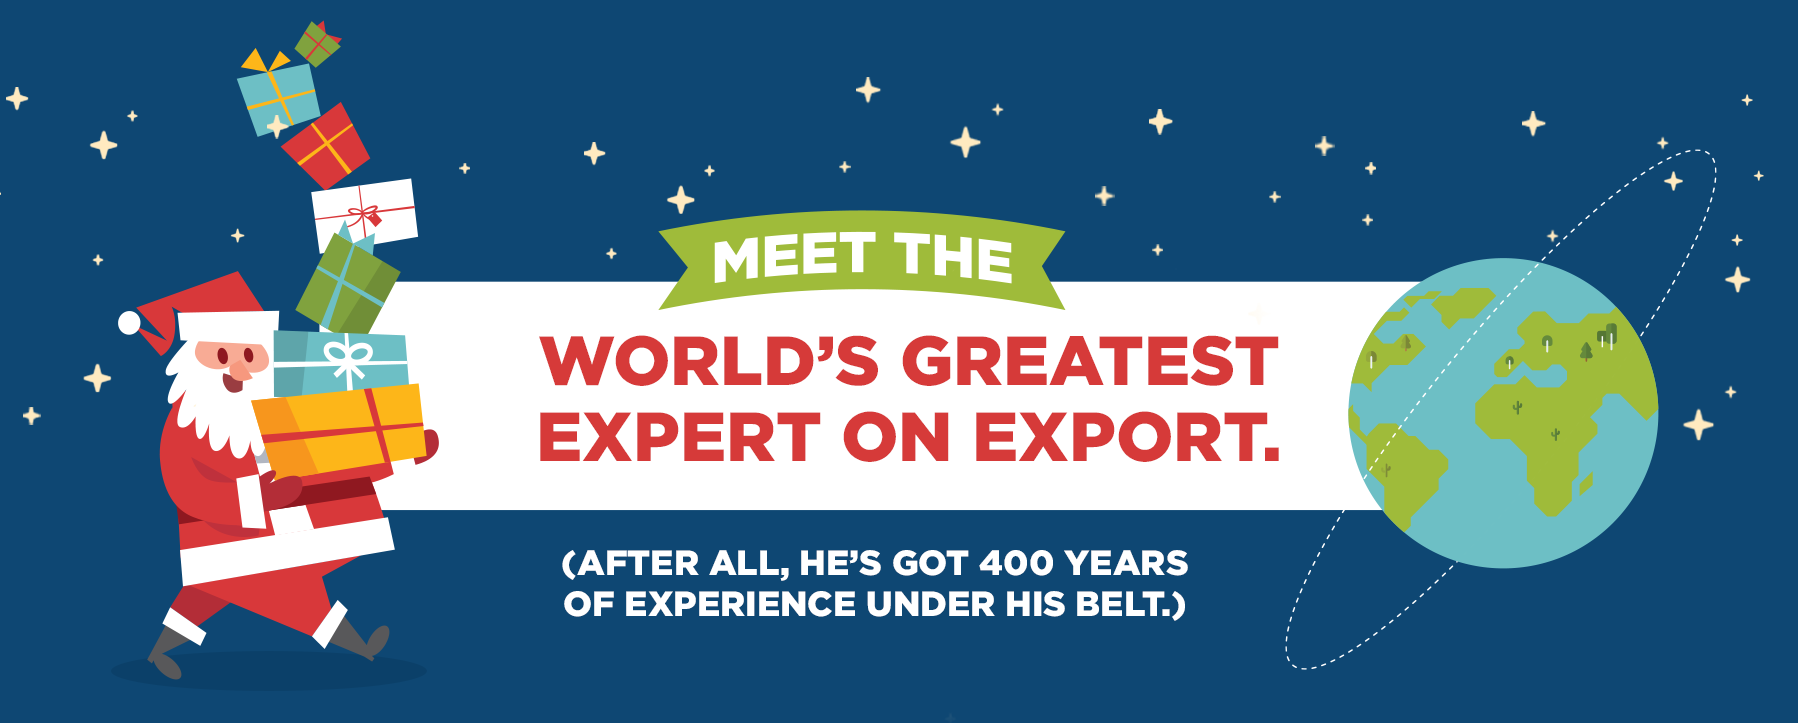 Santa holding a stack of gifts on a starry night background with a globe. Text: Meet the world's greatest expert on export. (After all, he's got 400 years of experience under his belt.)